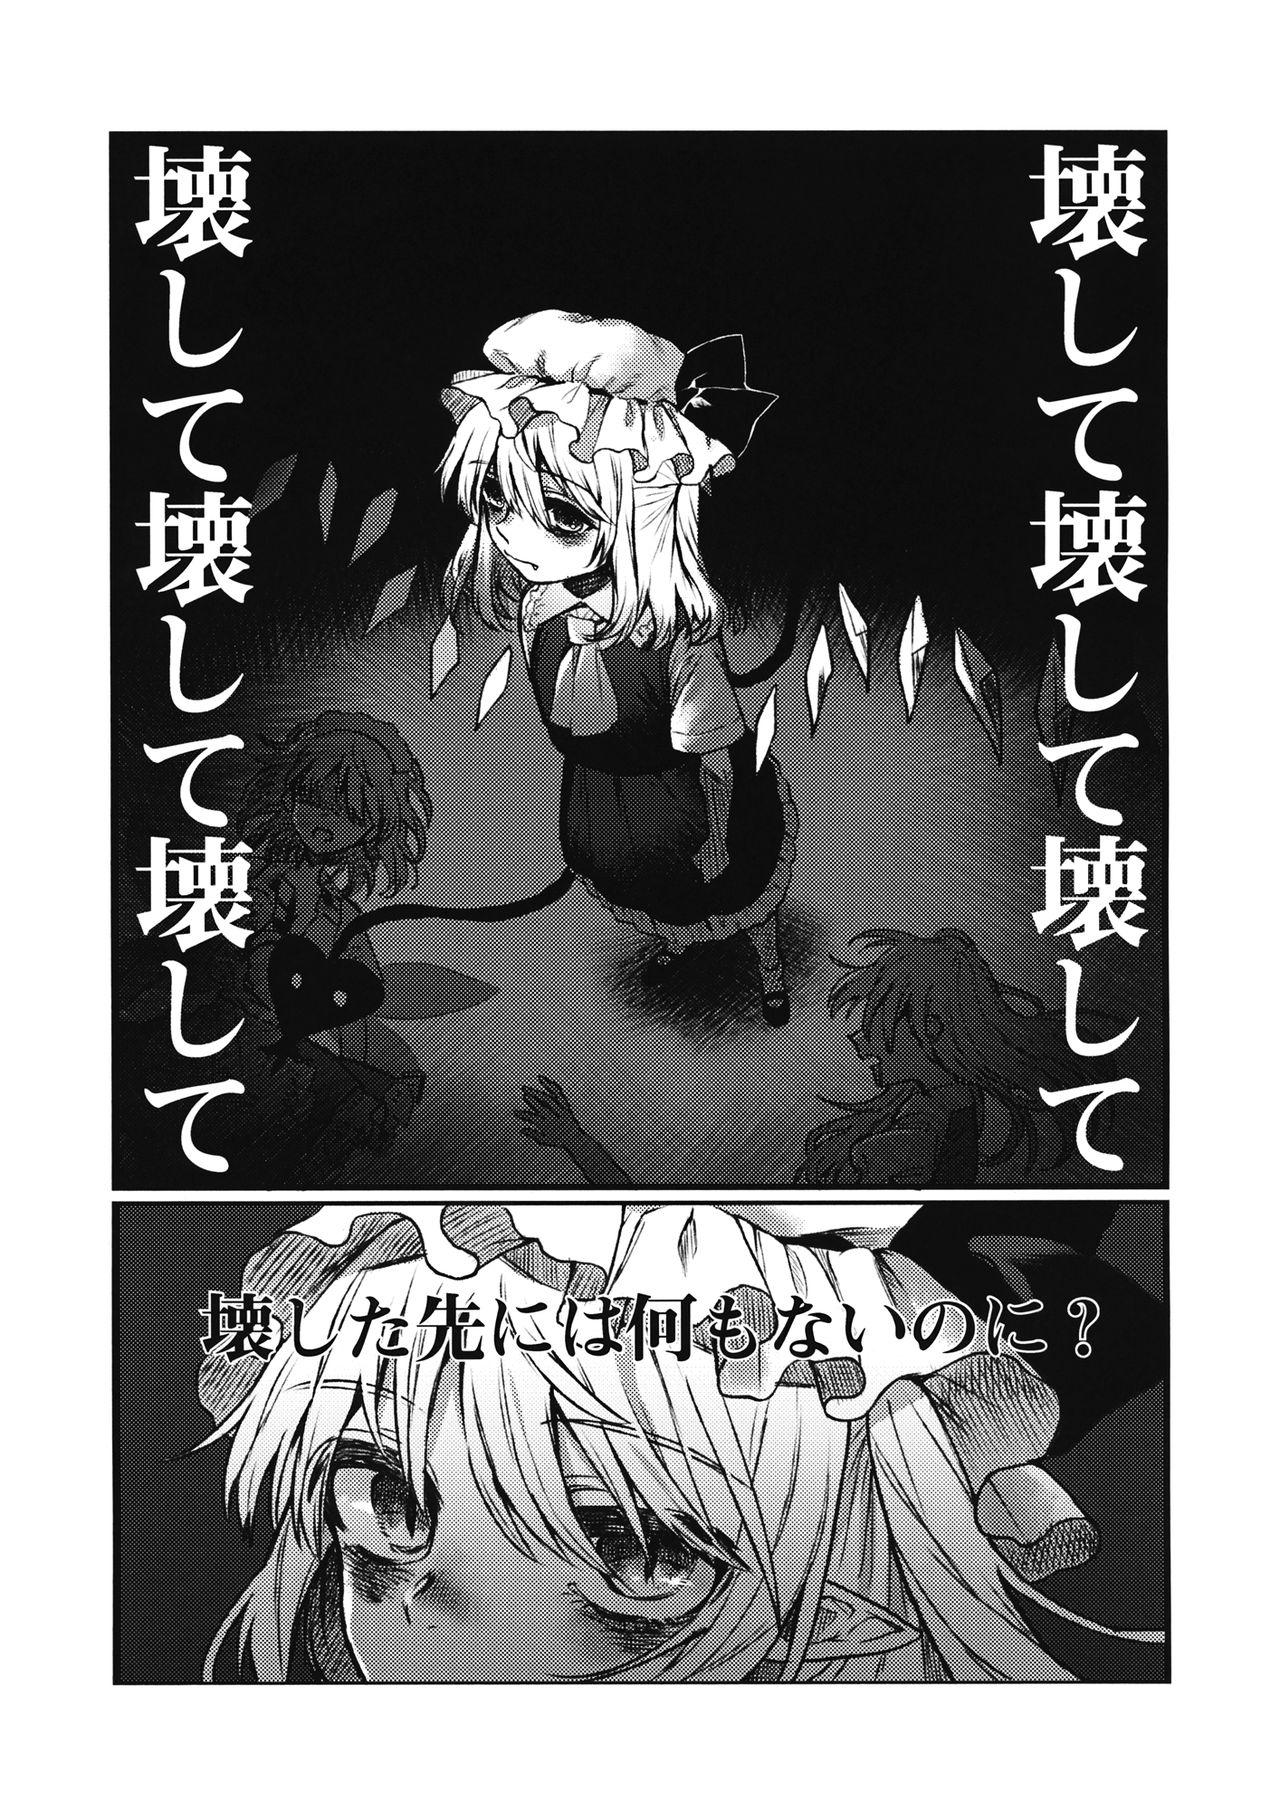 Anal Creampie Maid Flandre Kansatsu Nikki - Maid Flandre observation diary - Touhou project Bigtits - Page 2